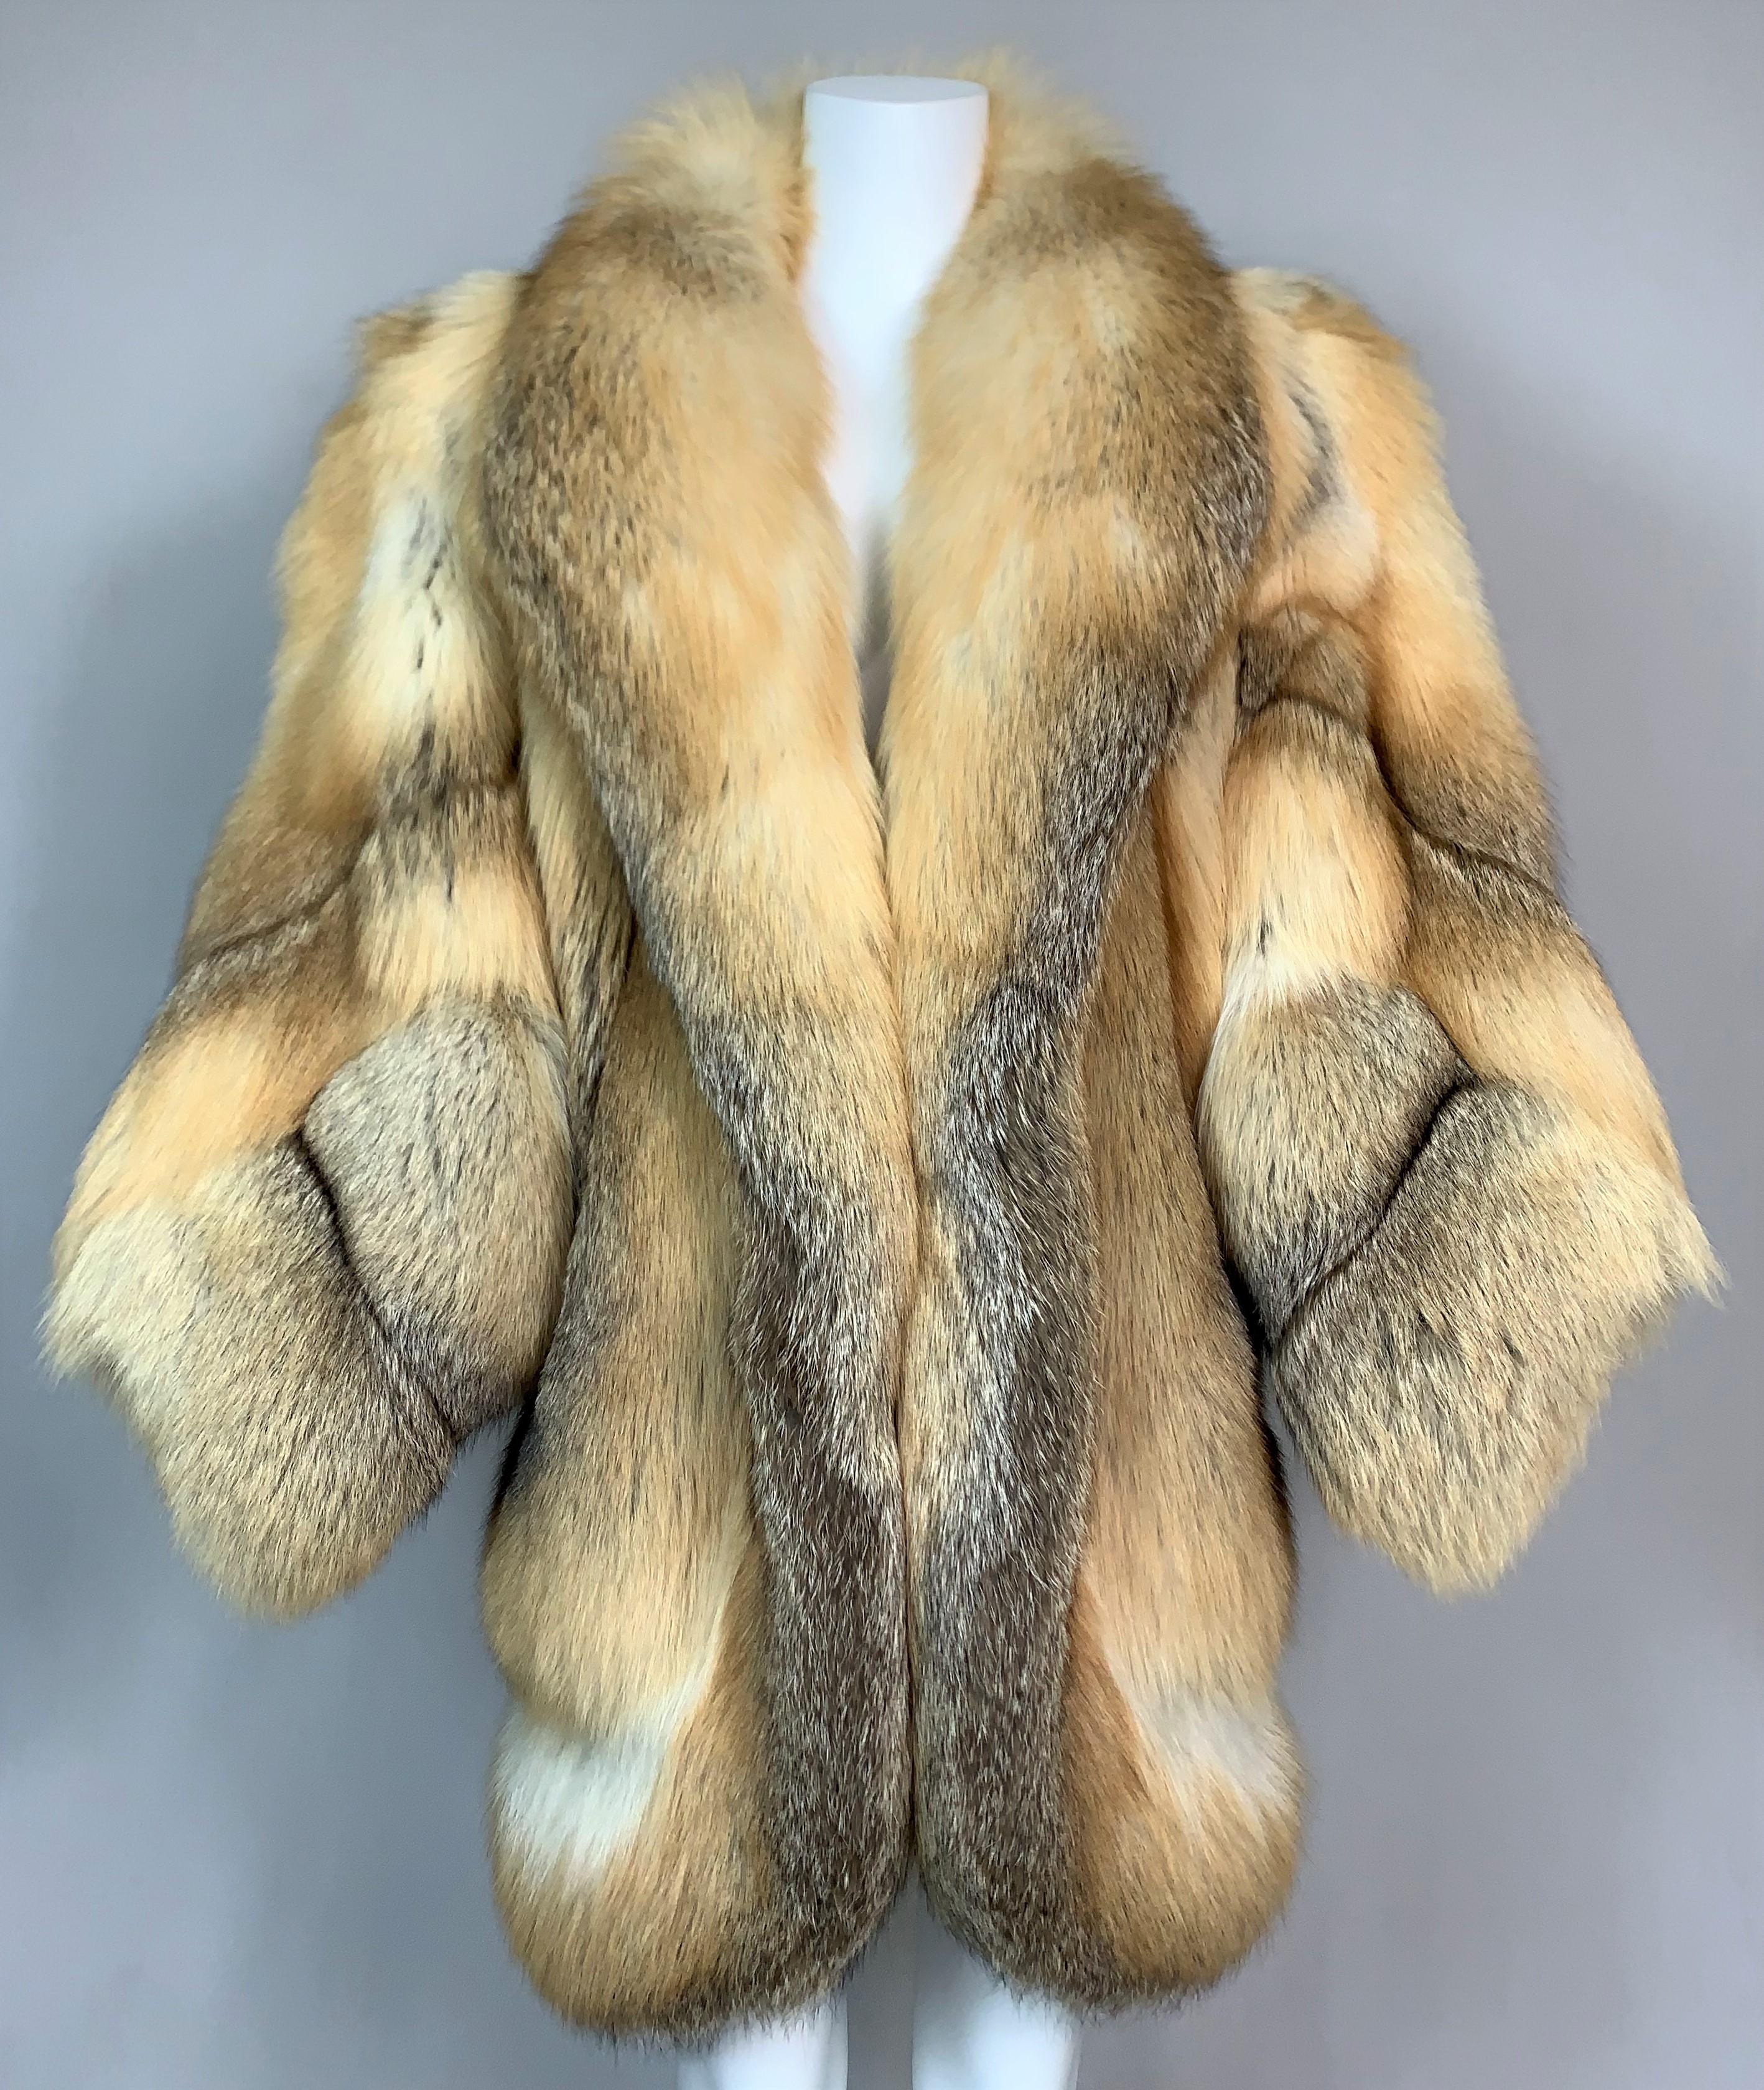 DESIGNER: 1970's Yves Saint Laurent

Please contact us for more images and/or information.

CONDITION: Good- no flaws- faint shedding on lining

FABRIC: Fox fur- single hook closure with hidden slit pockets

COUNTRY: France

SIZE: